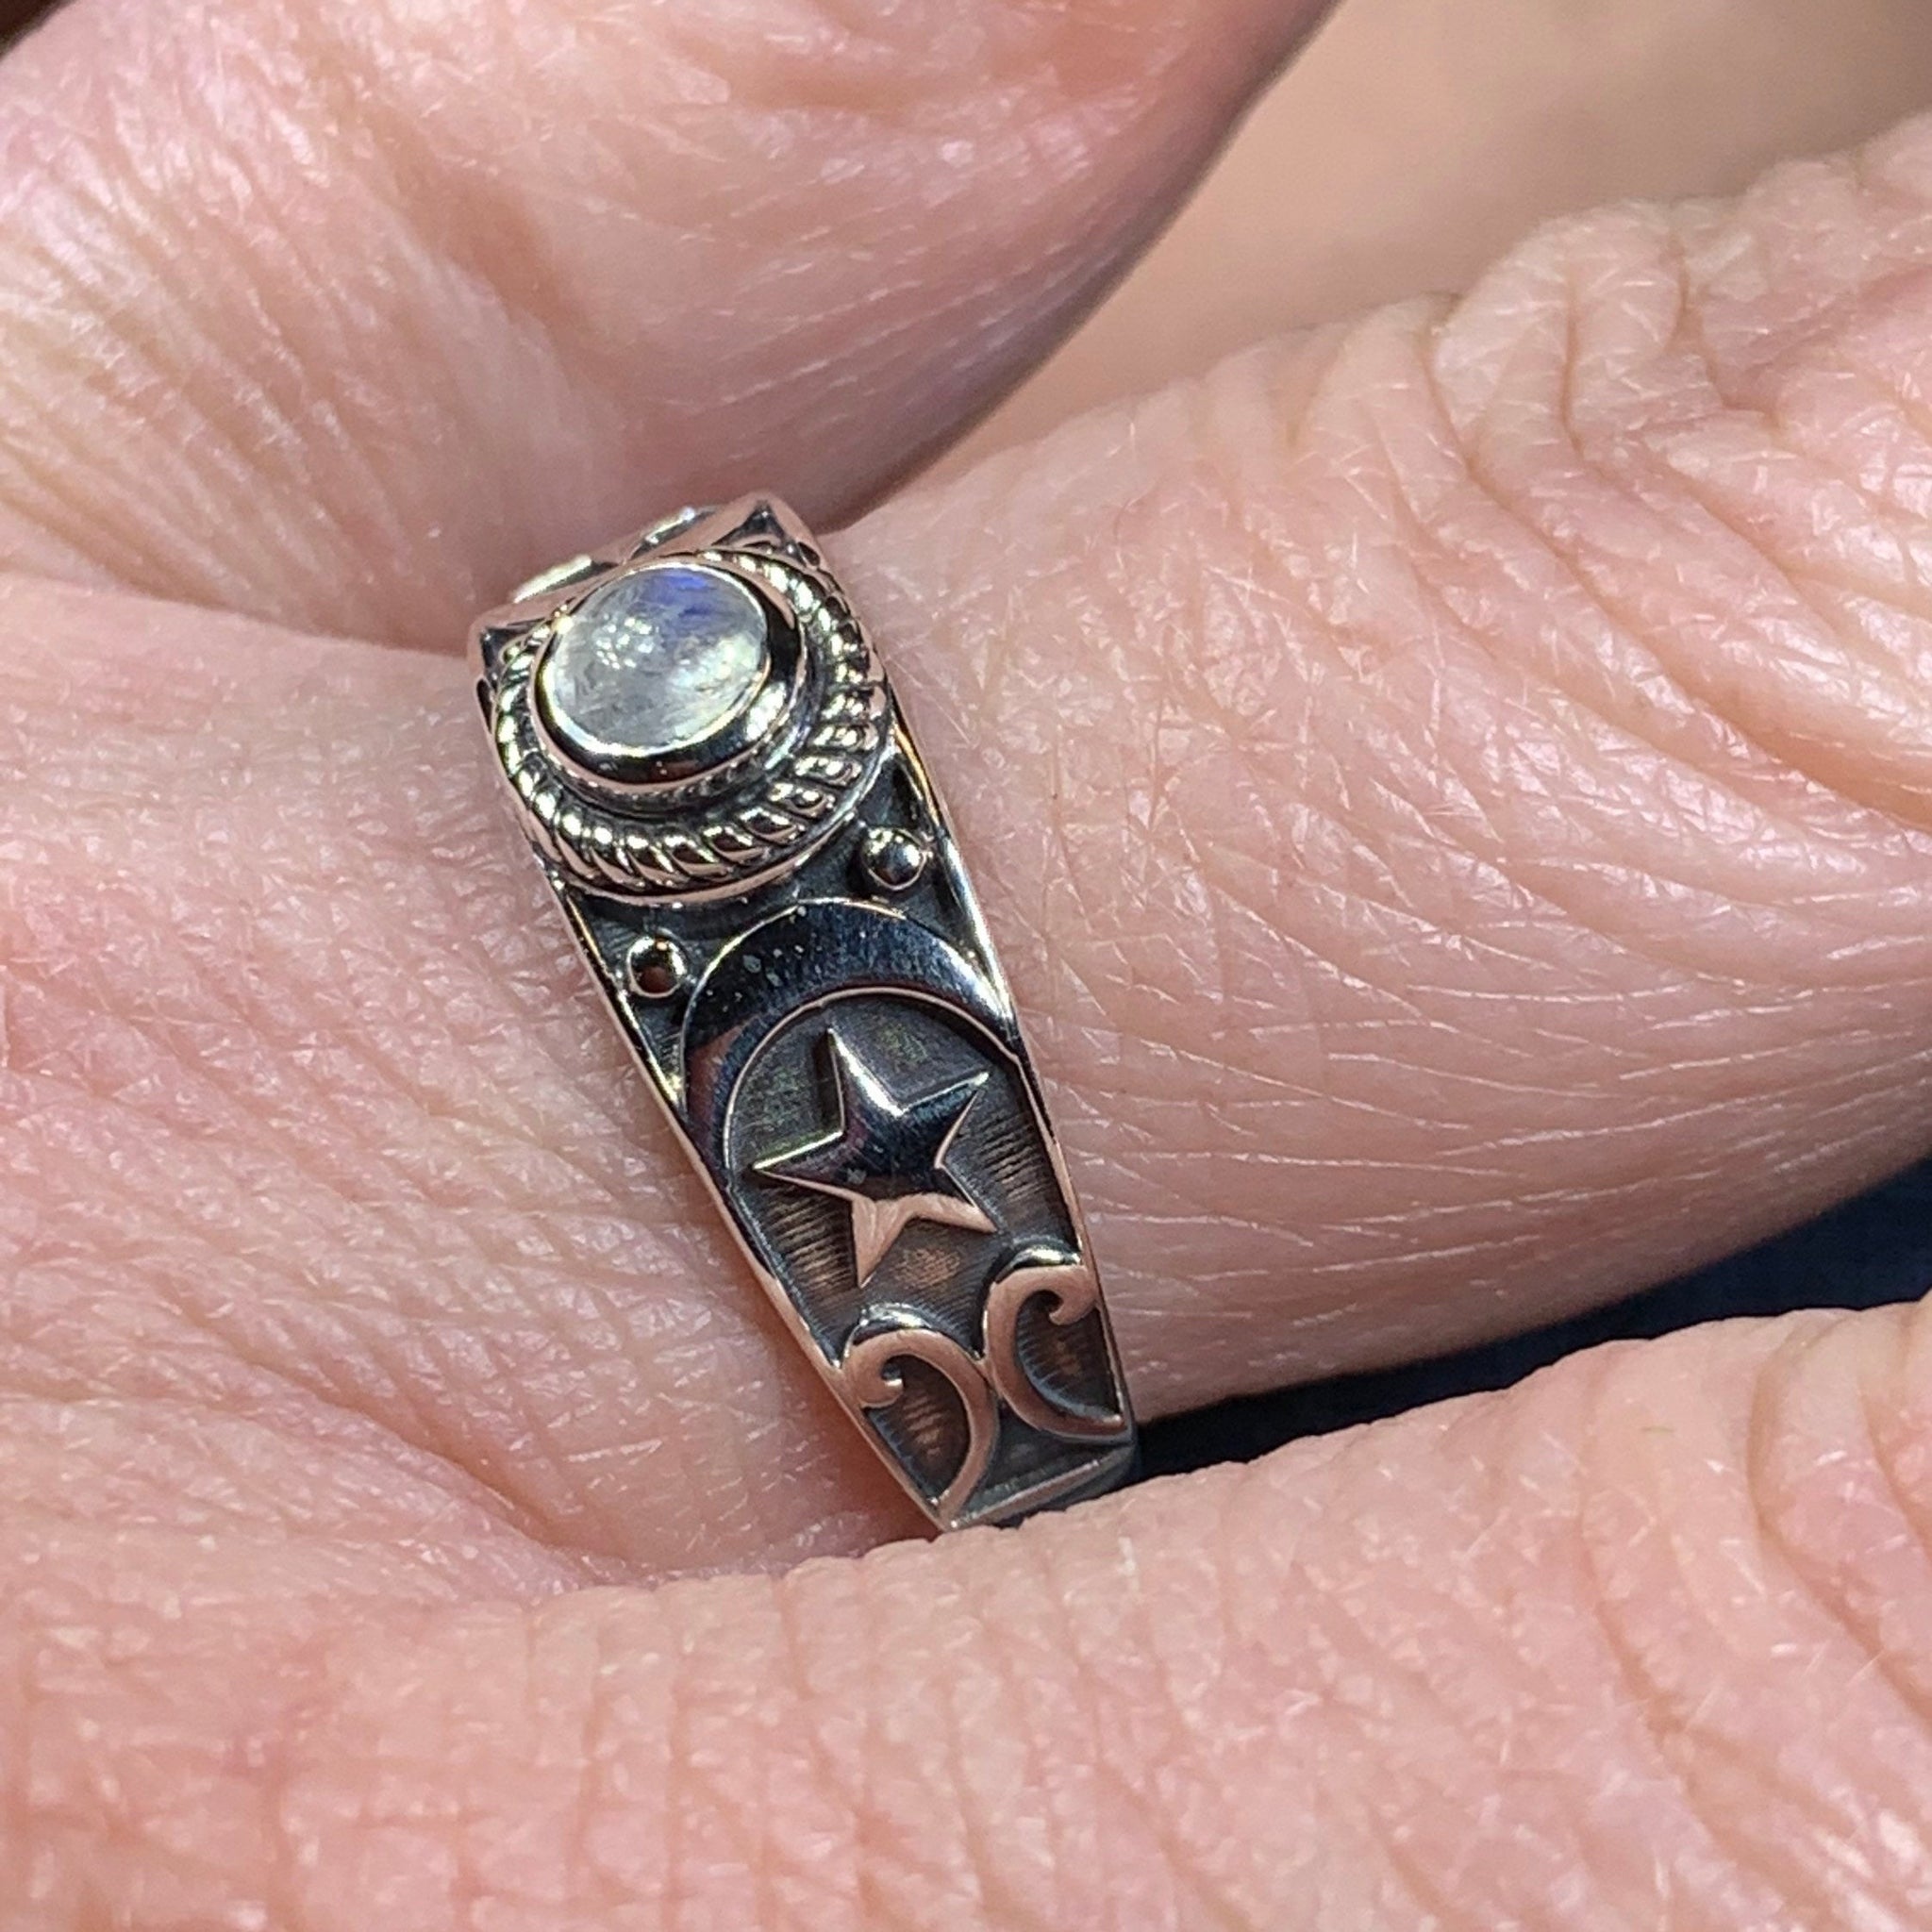 Radiant Crescent Moon Ring – Celtic Crystal Design Jewelry